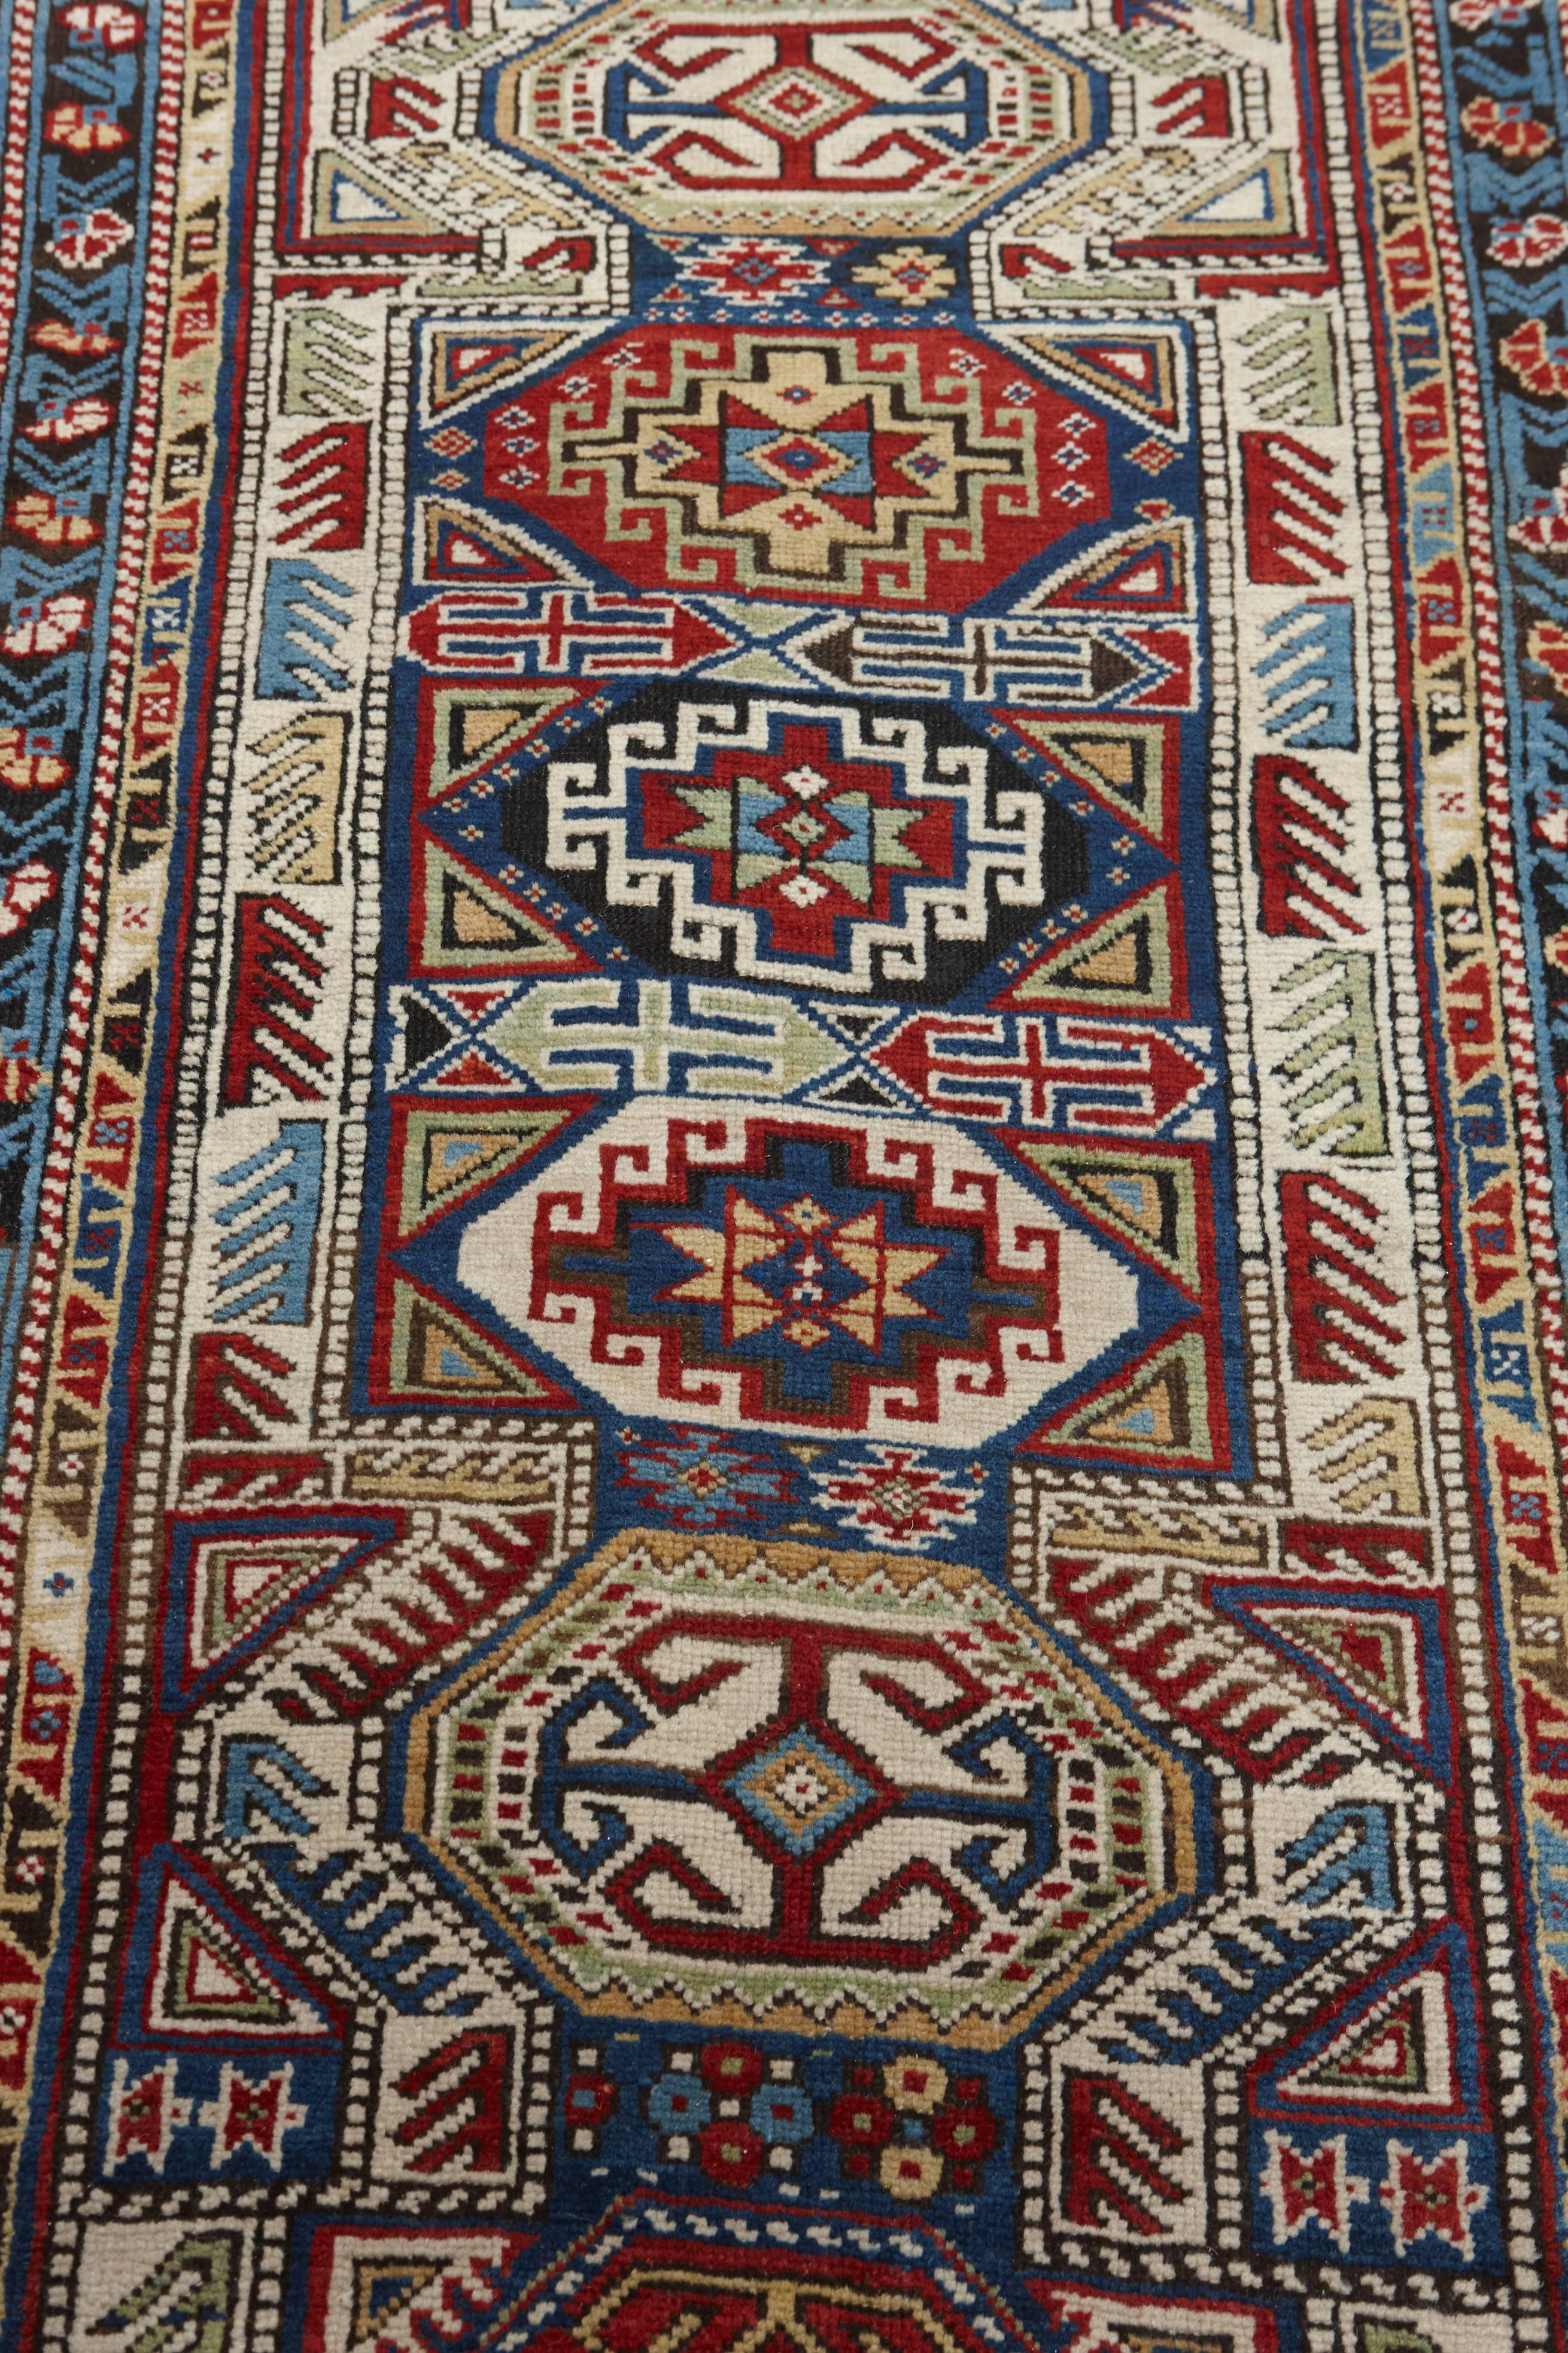 One of the most exemplary Kazak weaves we witnessed in our 50+ years of antique rug dealing! 

Tremendously fine and compactly woven, the warps and wefts give an impression of a finer weaving style at first glance, yet closer inspection reveals